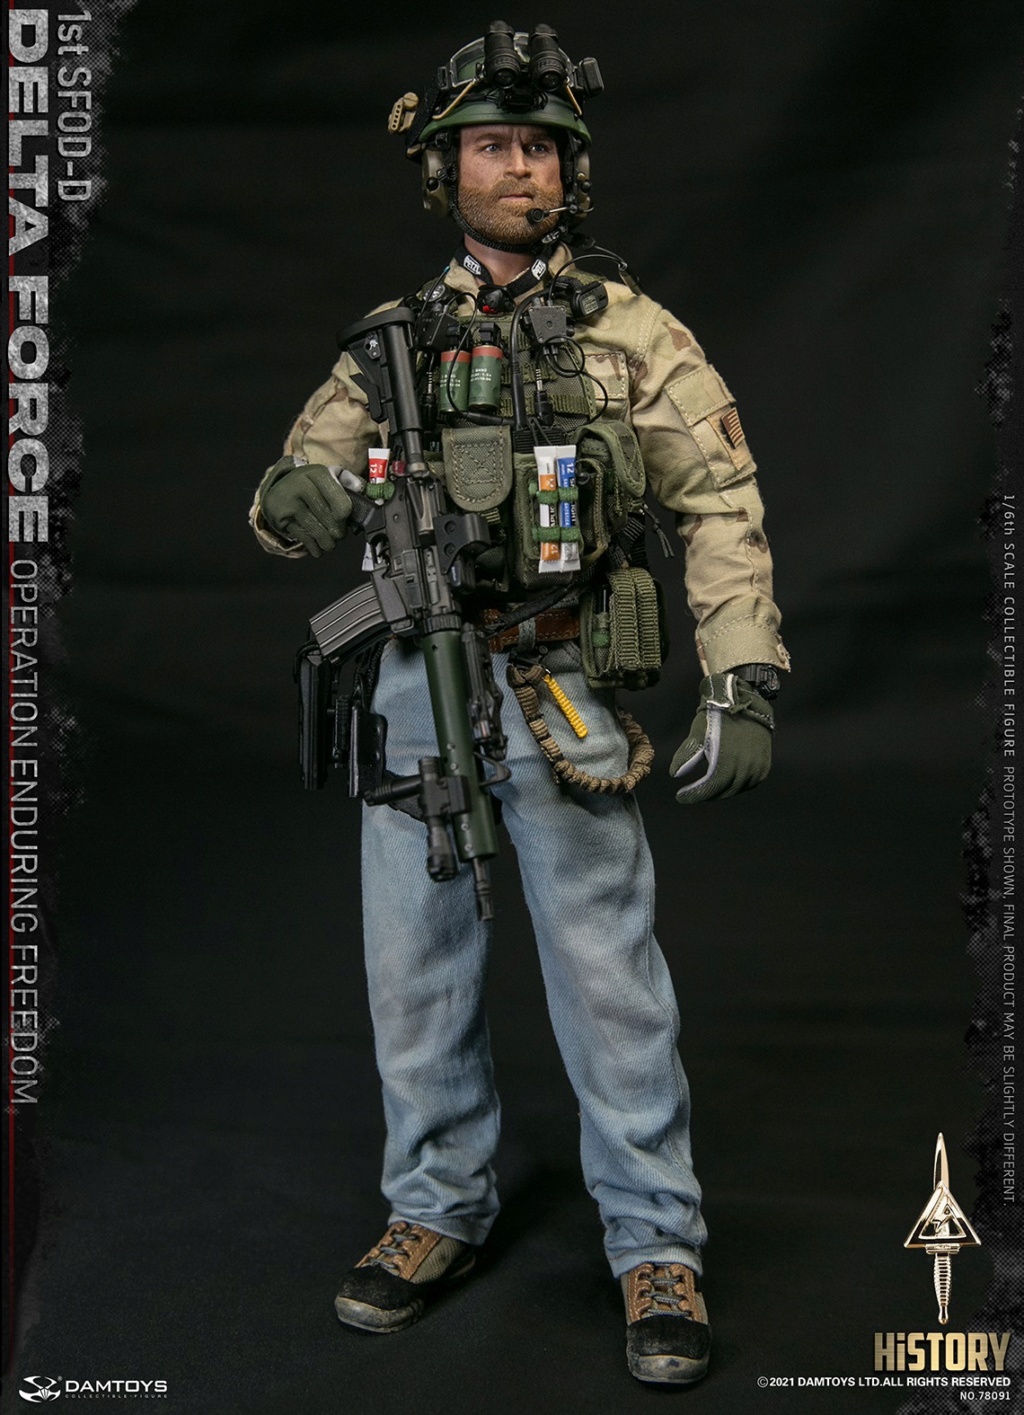 modernmilitary - NEW PRODUCT: DAMTOYS: 1/6 Delta Forces 1st SFOD-D Operation Enduring Freedom #78091 10520910